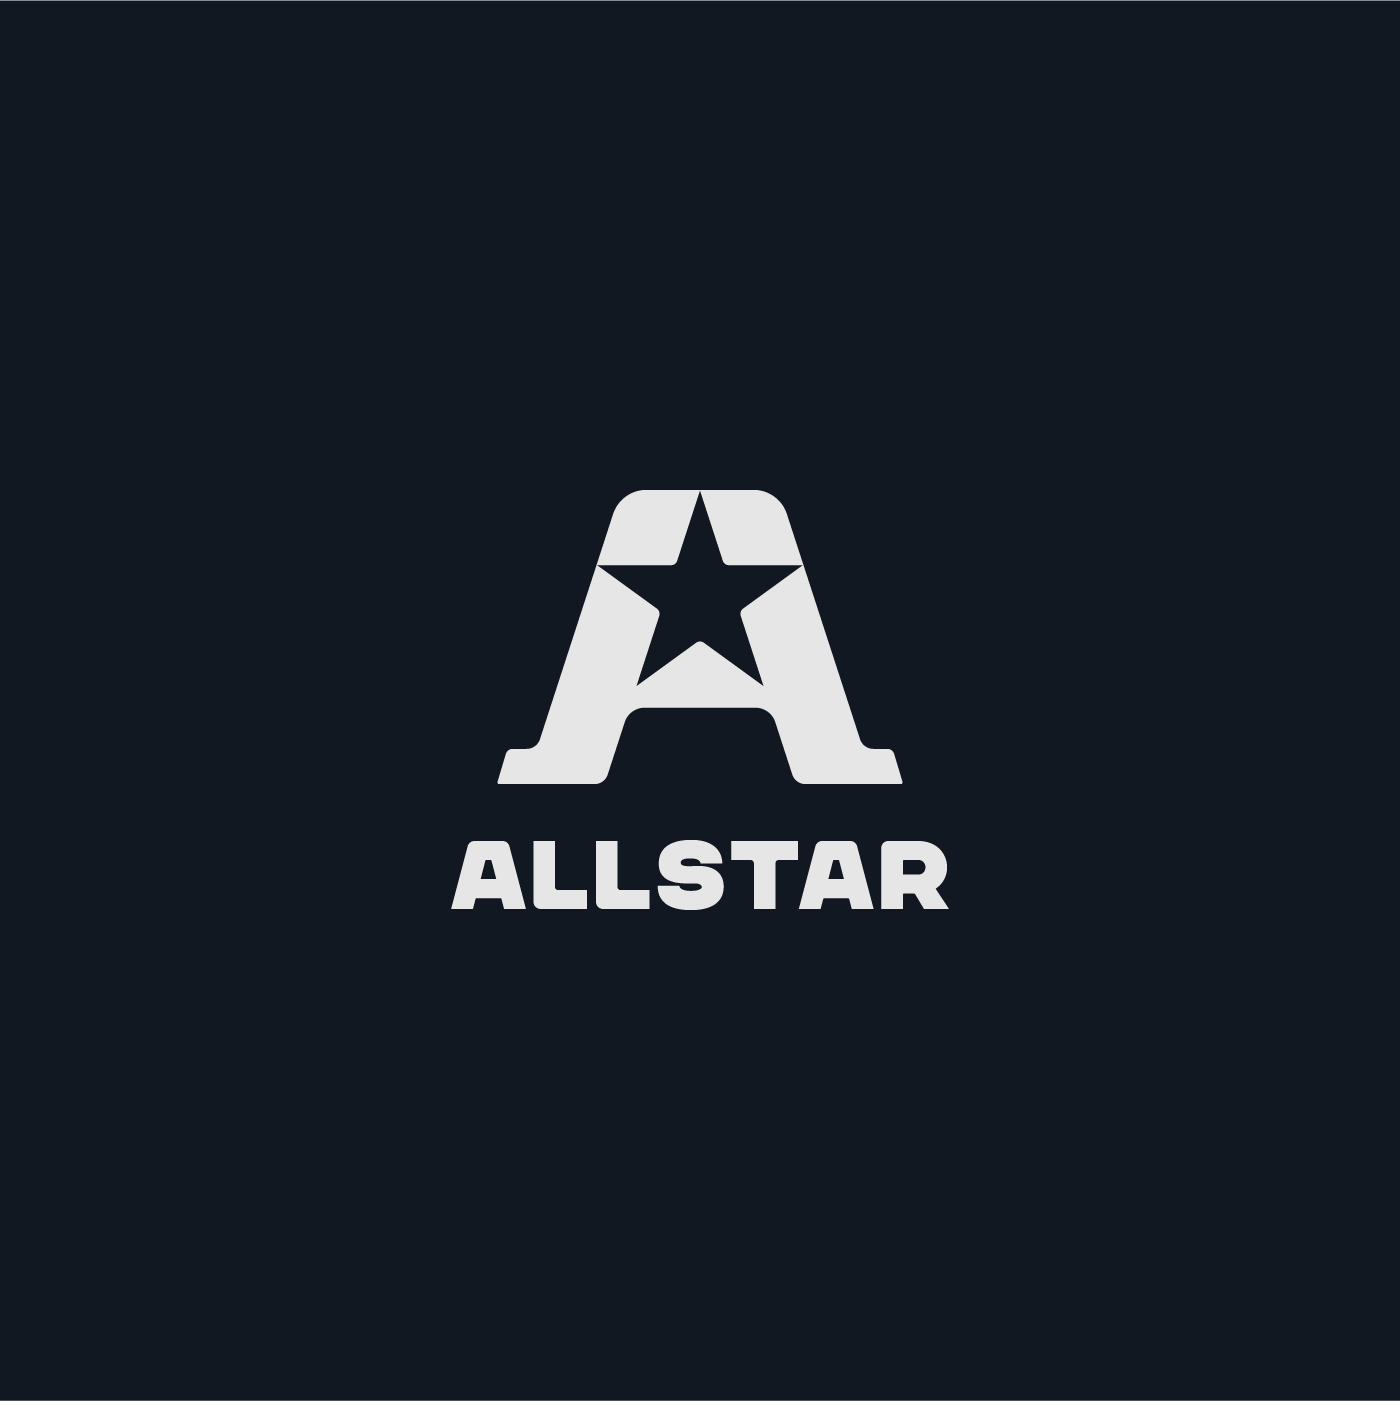 All Star - Letter A and a 5 point Star in the negative space